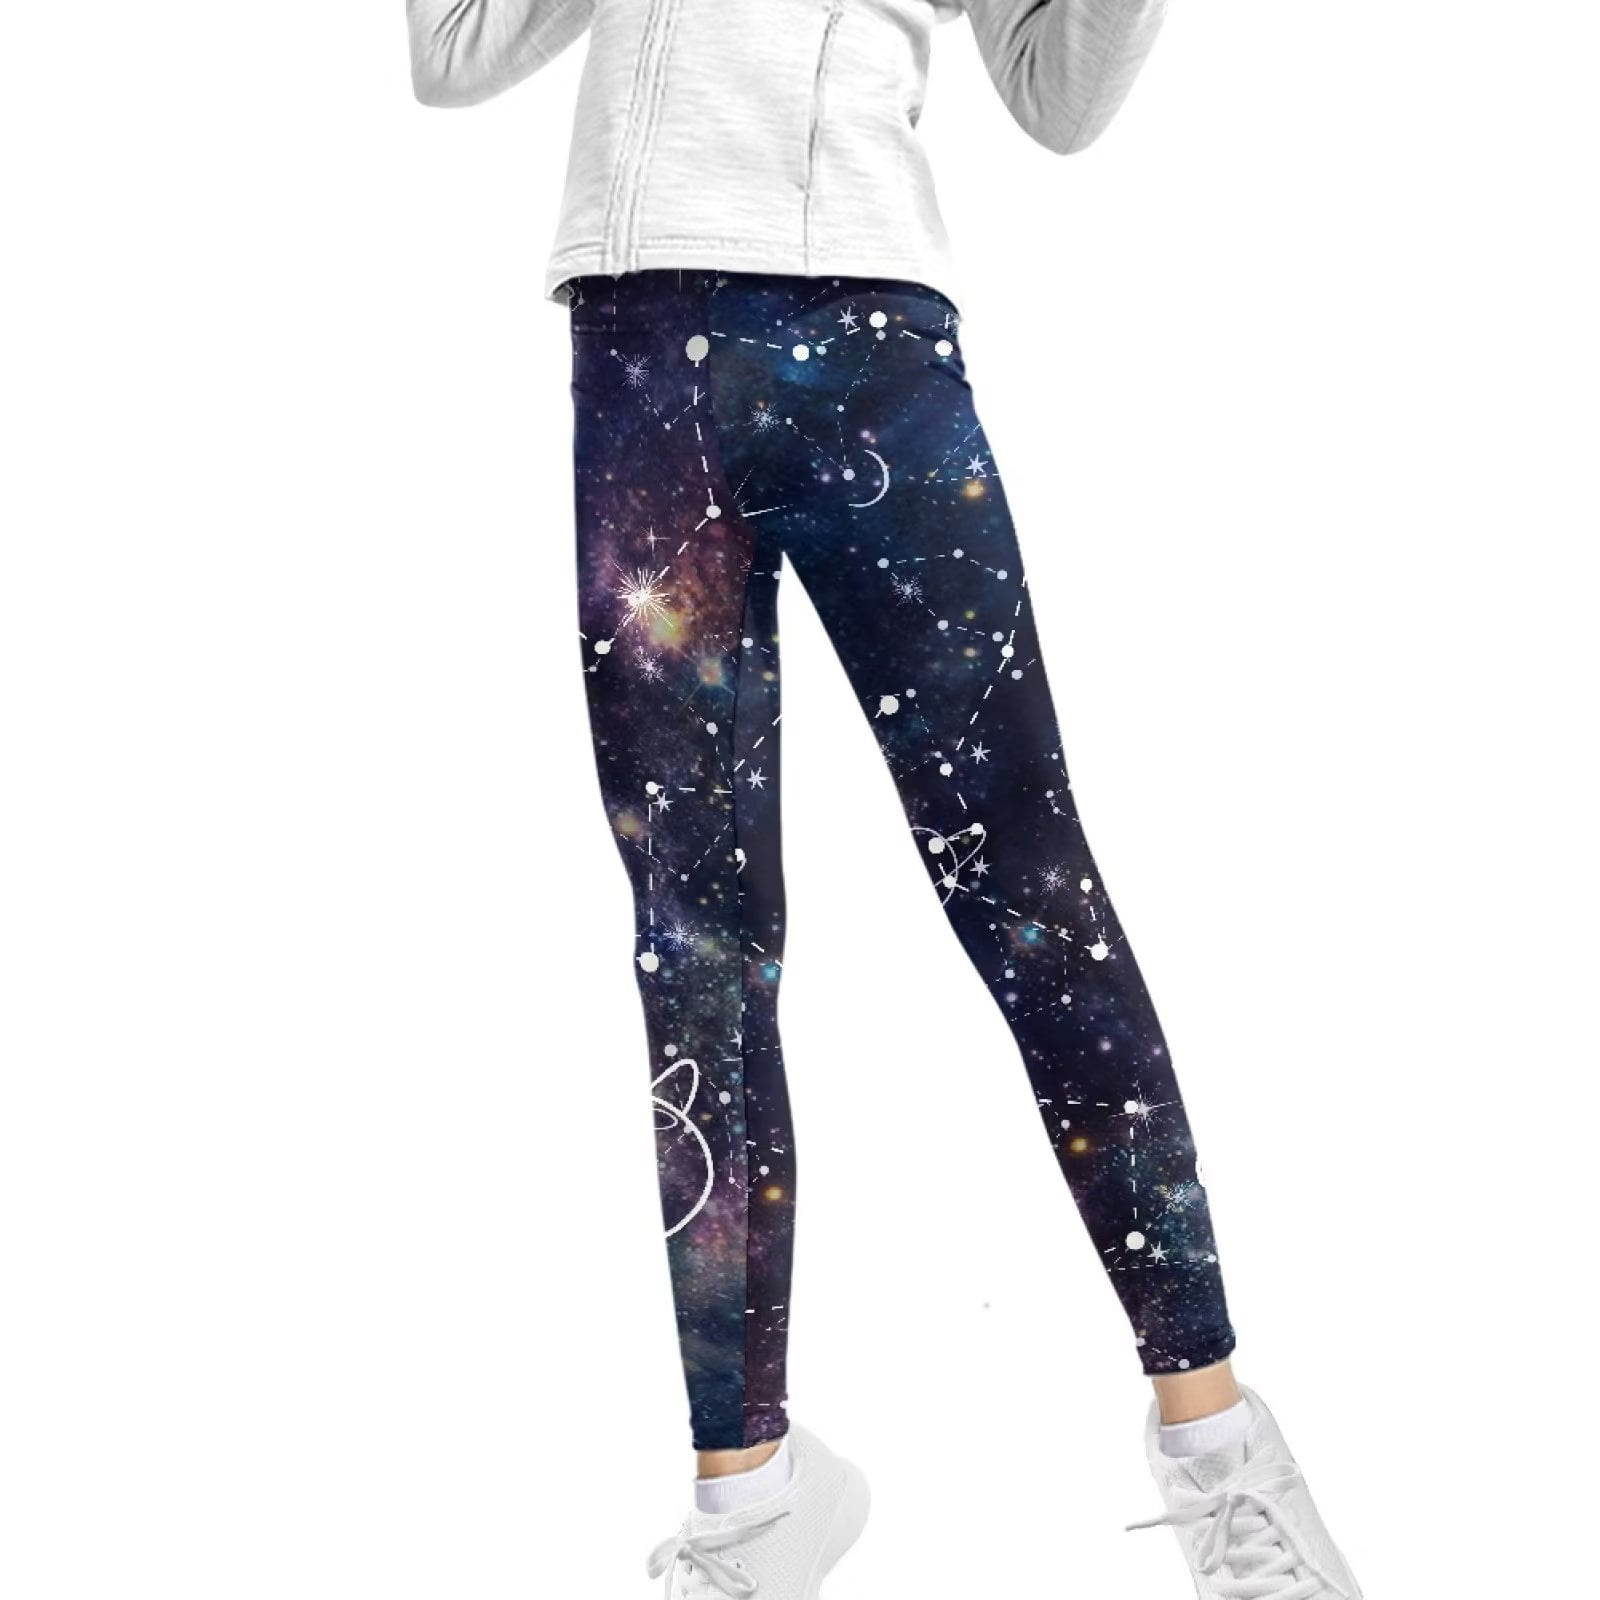 FKELYI Galaxy Space Girls Leggings Size 10-11 Years Comfortable Home Yoga  Pants High Waisted Straight Leg Soft School Teen Kids Tights 